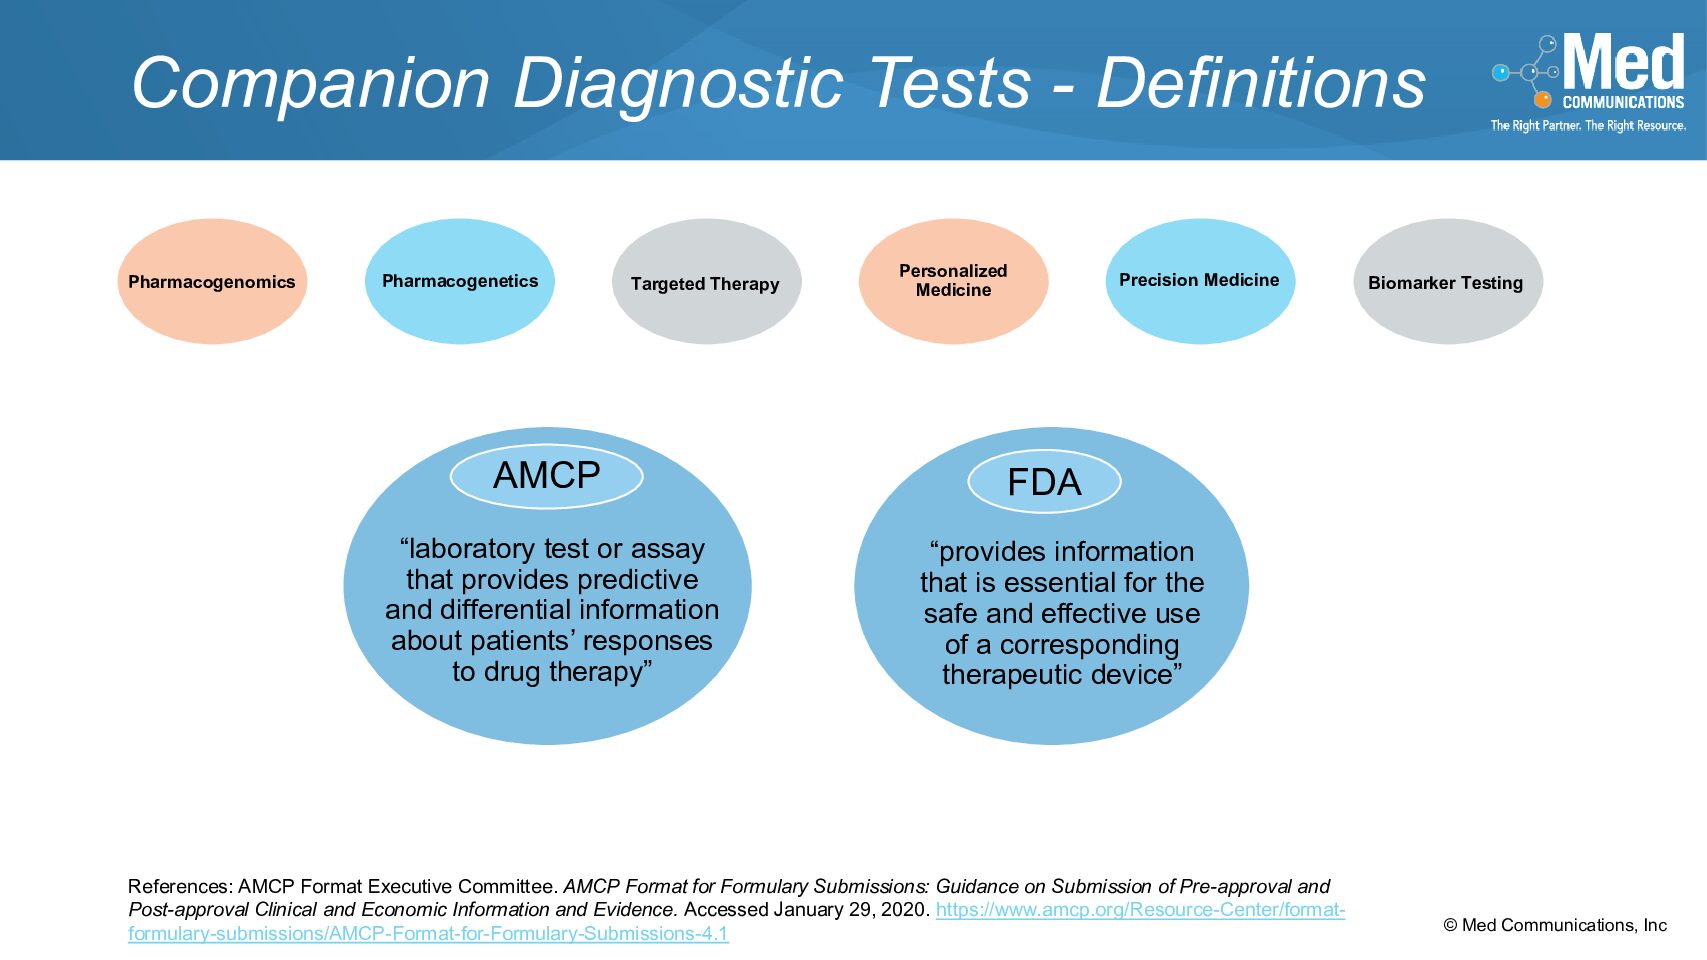 AMCP Format for Formulary Dossiers Series – Use of Companion Diagnostic Tests